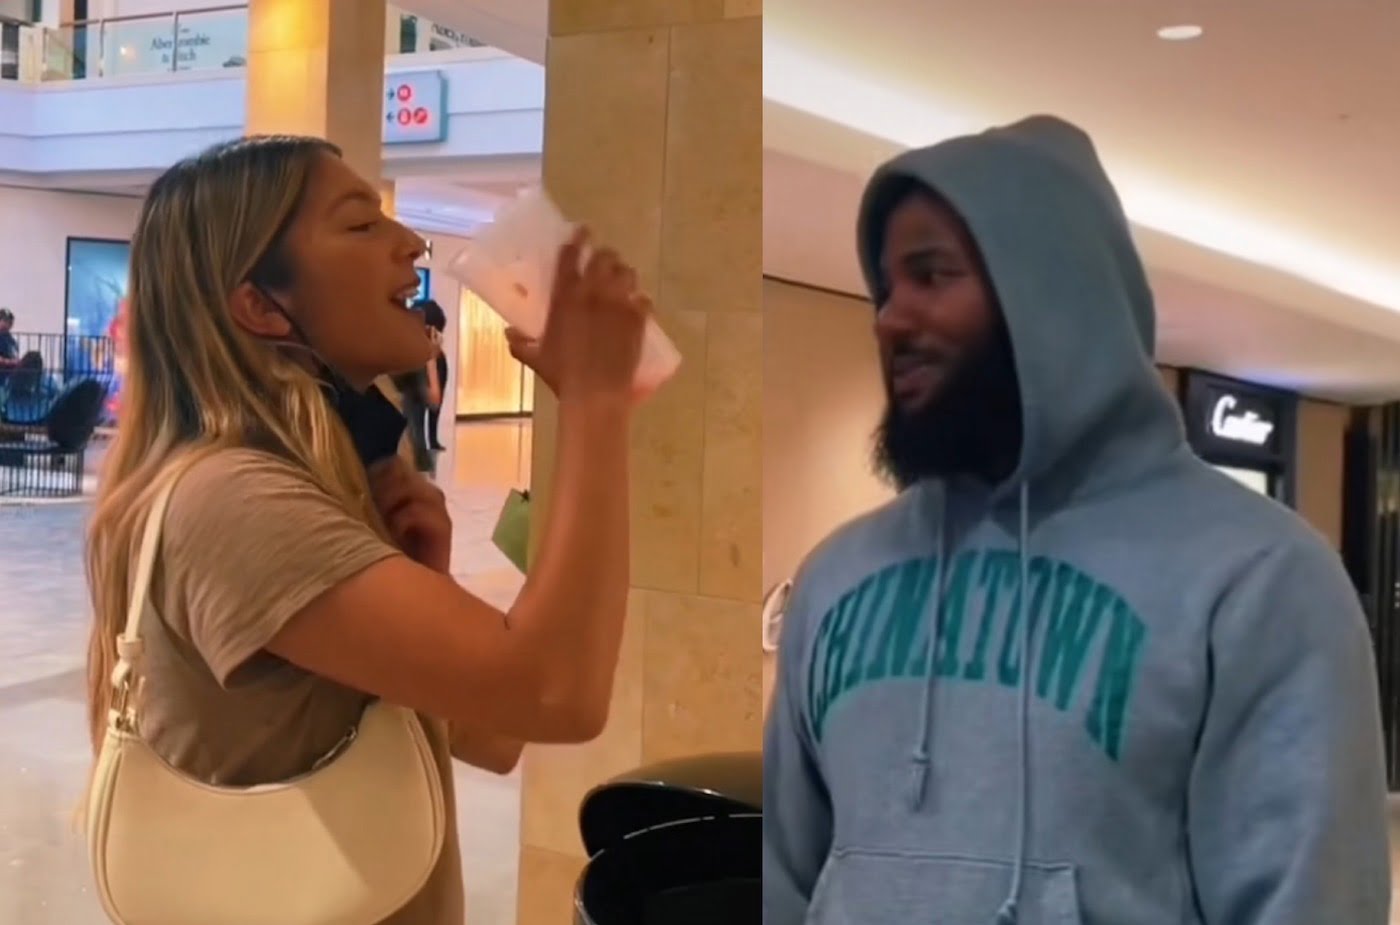 Rapper The Game Gets Woman To Drink From Trash Bin For Balenciaga Gears